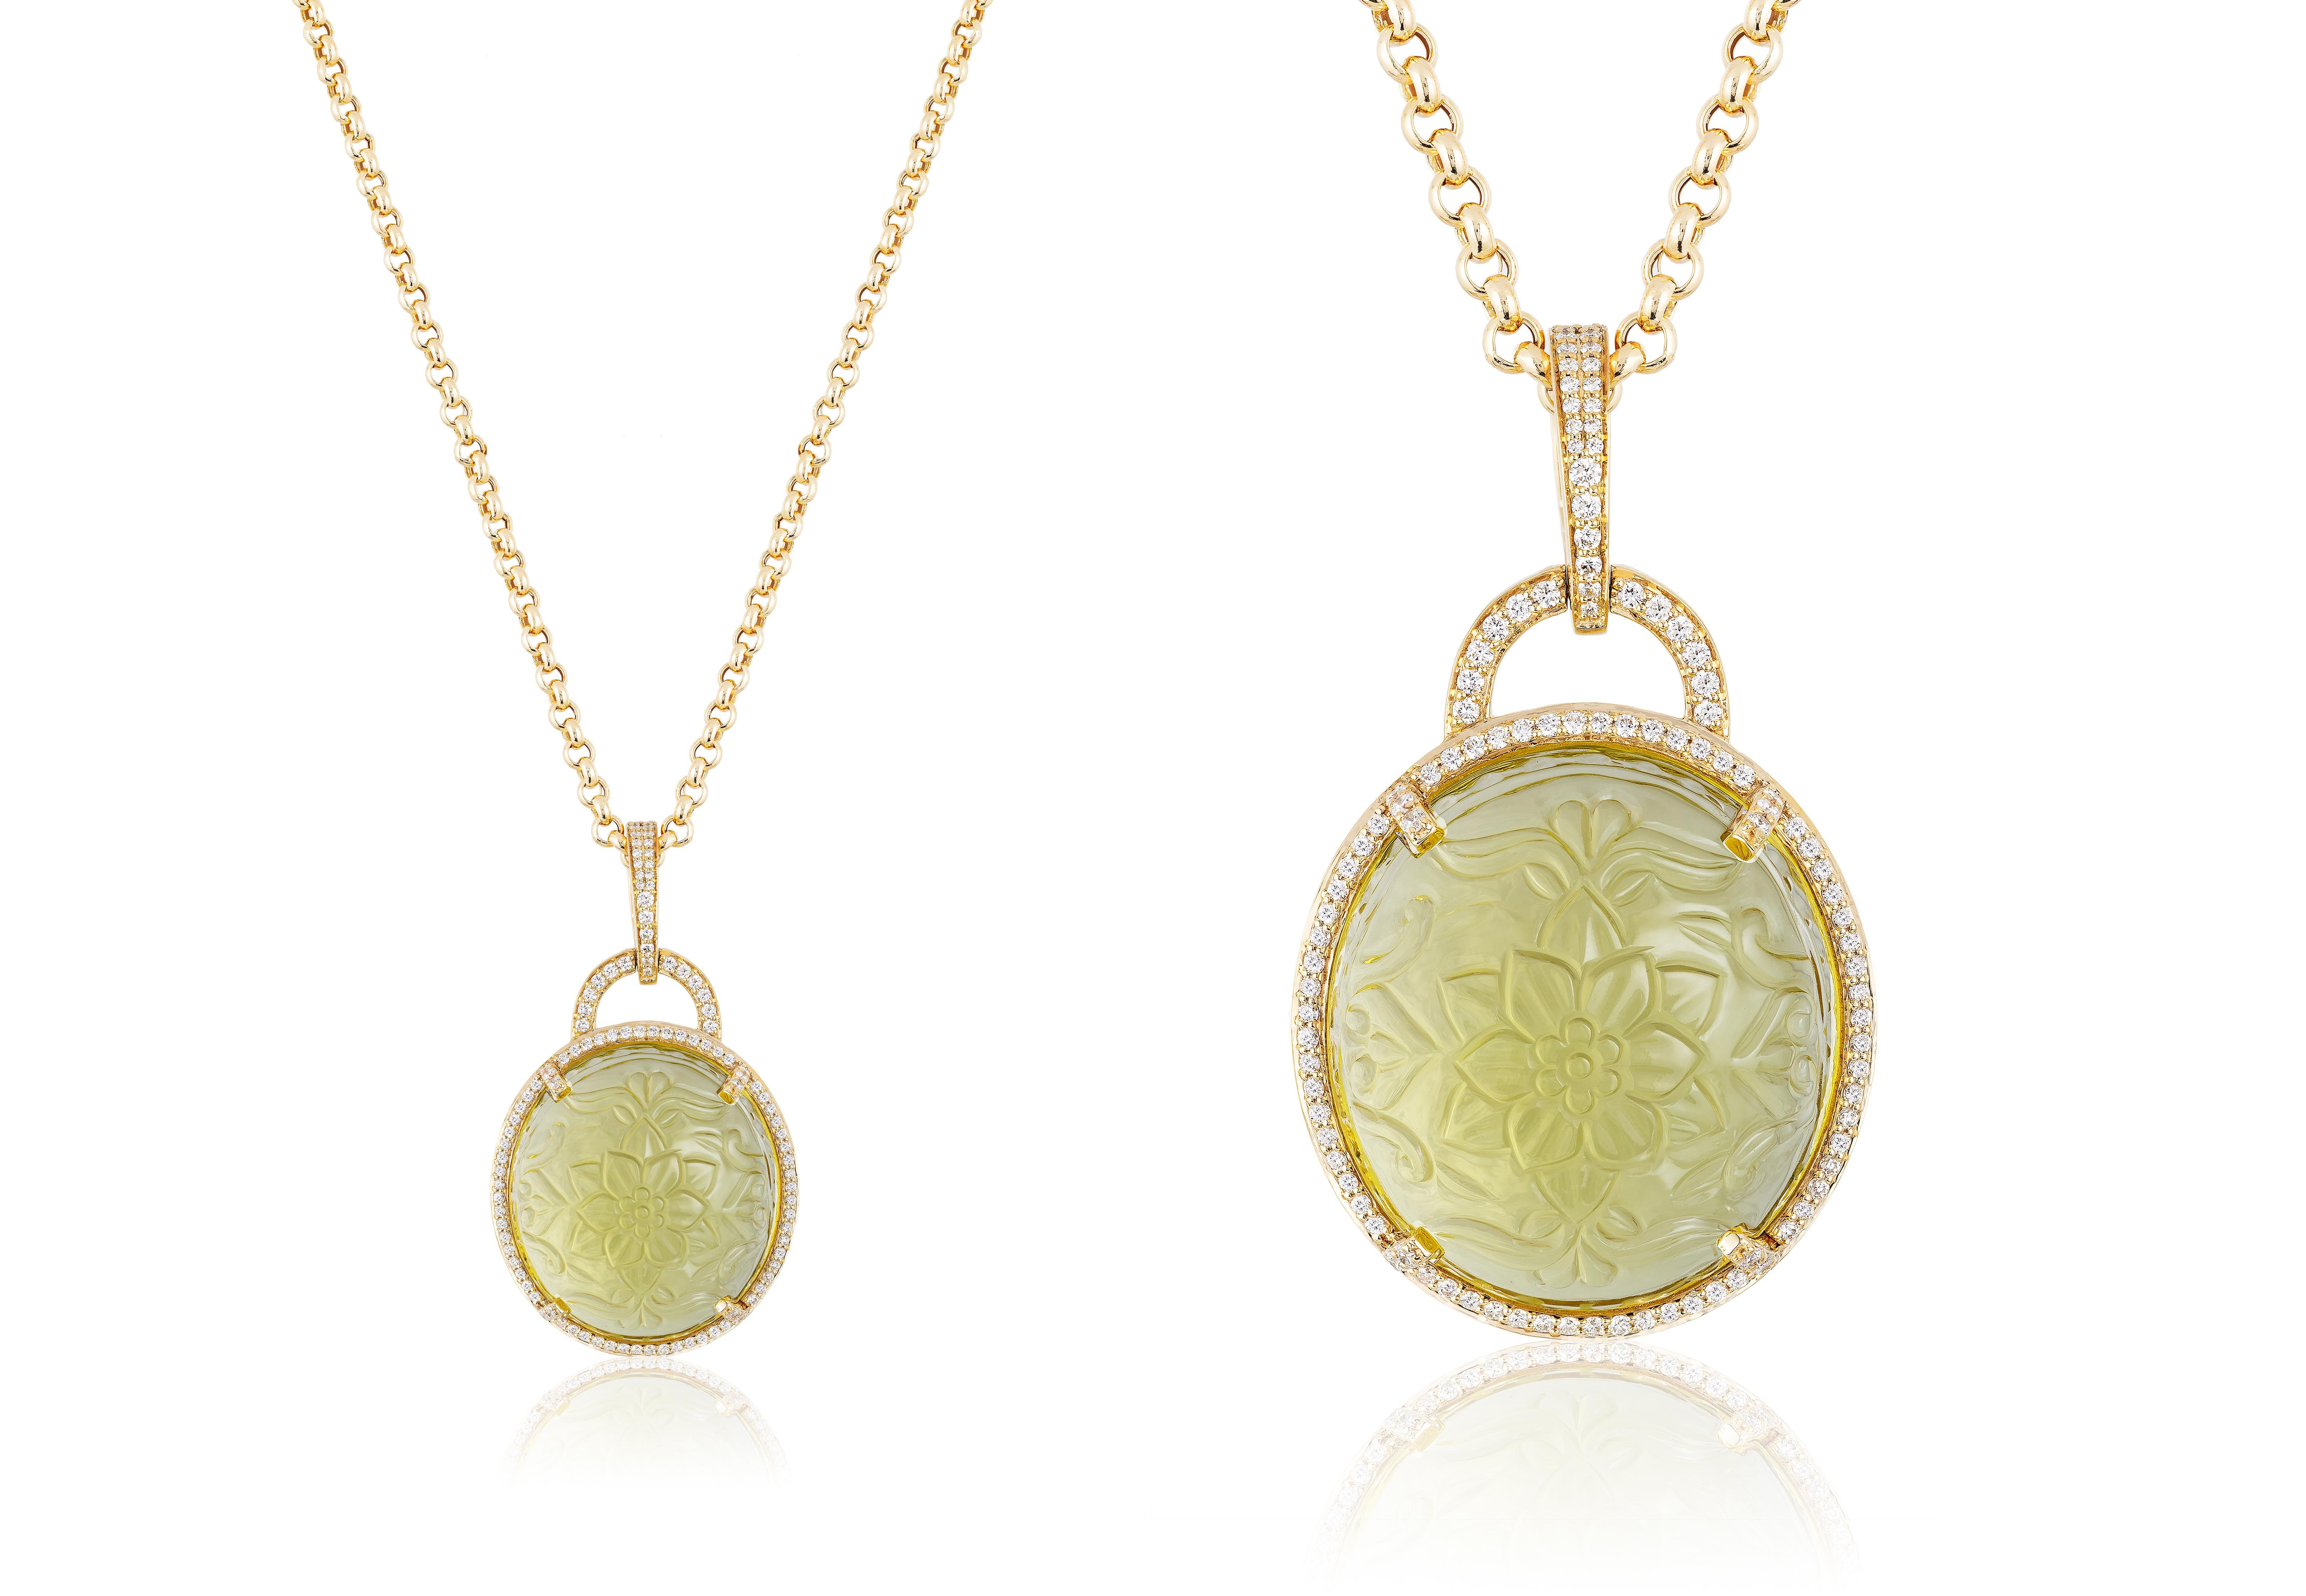 This Oval Lemon Quartz Carved Pendant with Diamonds in 18K Yellow Gold is a stunning piece from the 'Rock 'N Roll' Collection. This pendant features a beautifully carved oval-shaped lemon quartz stone set in 18K yellow gold, surrounded by sparkling